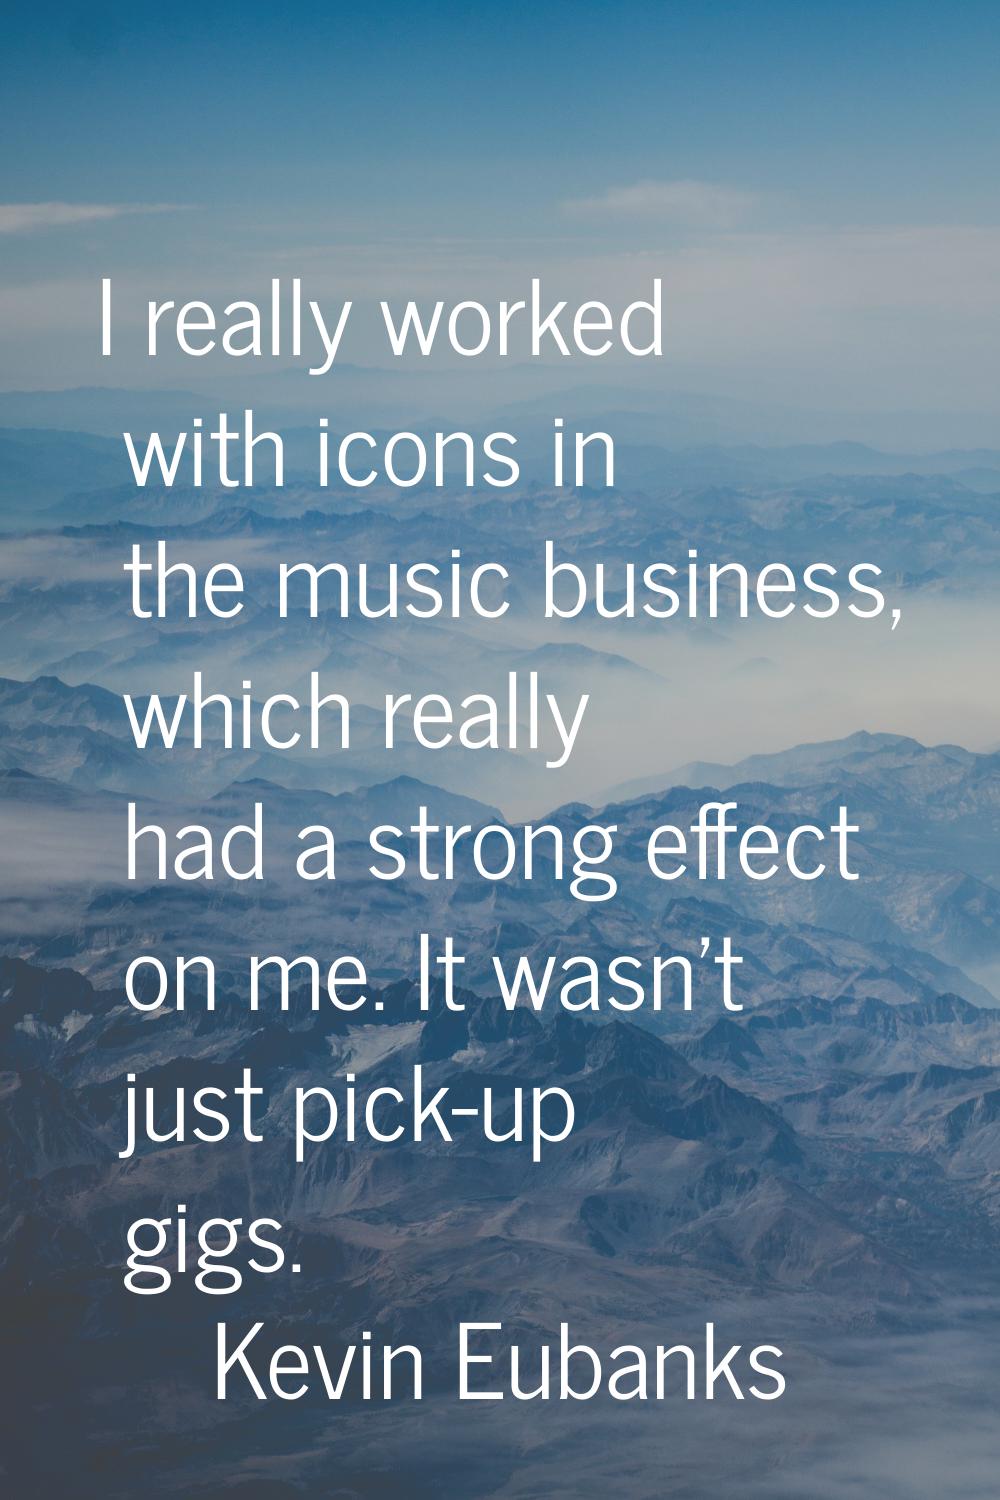 I really worked with icons in the music business, which really had a strong effect on me. It wasn't